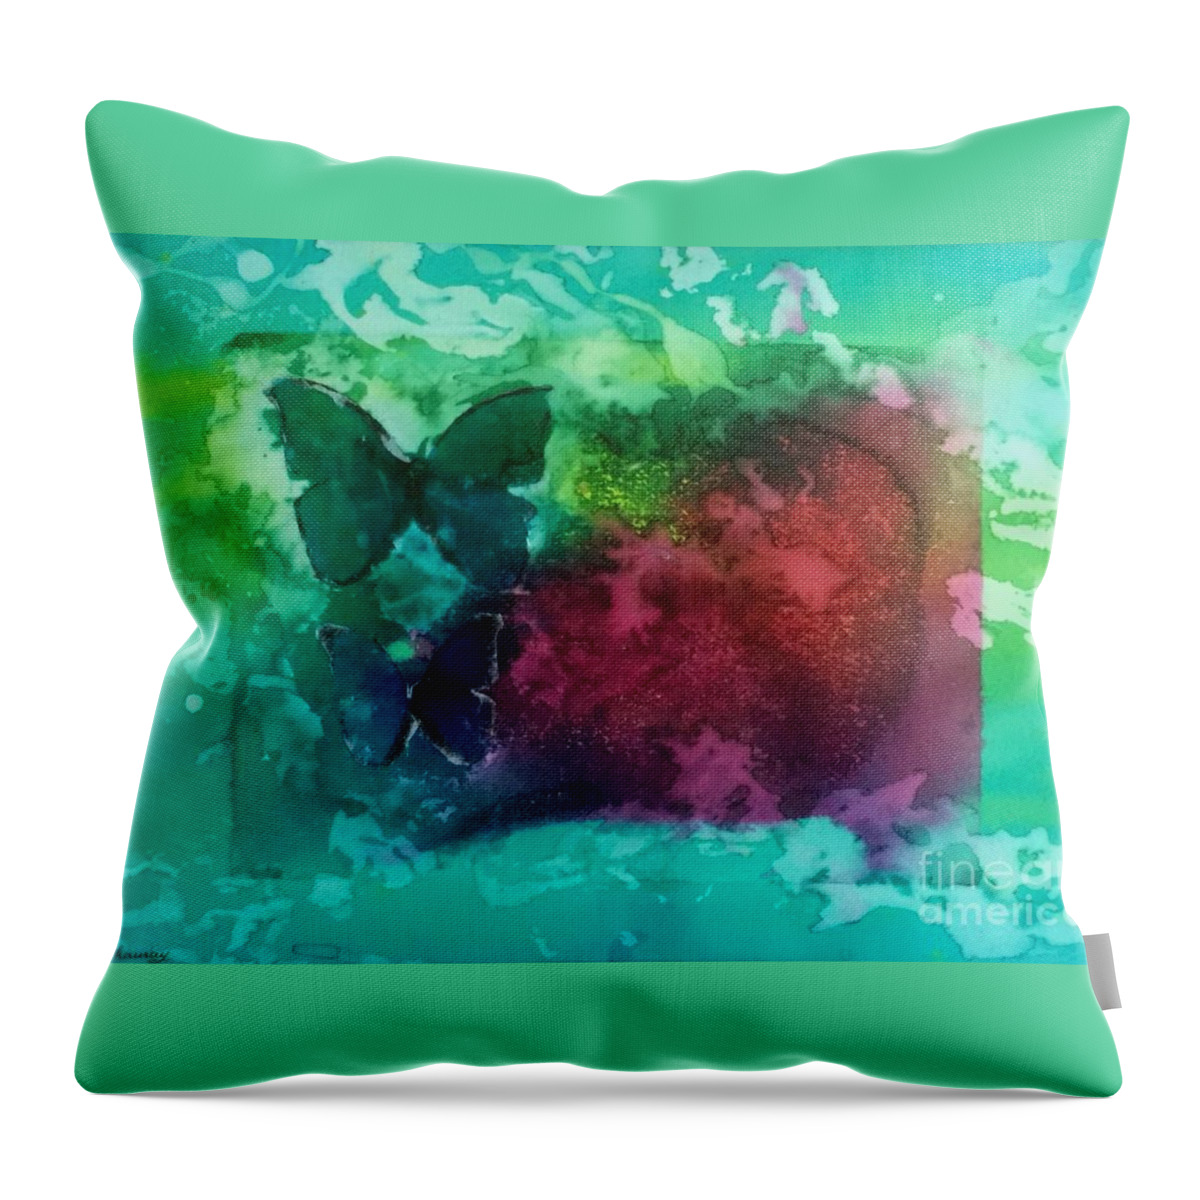 Papillon Throw Pillow featuring the painting Papillons Marins by Francoise Chauray